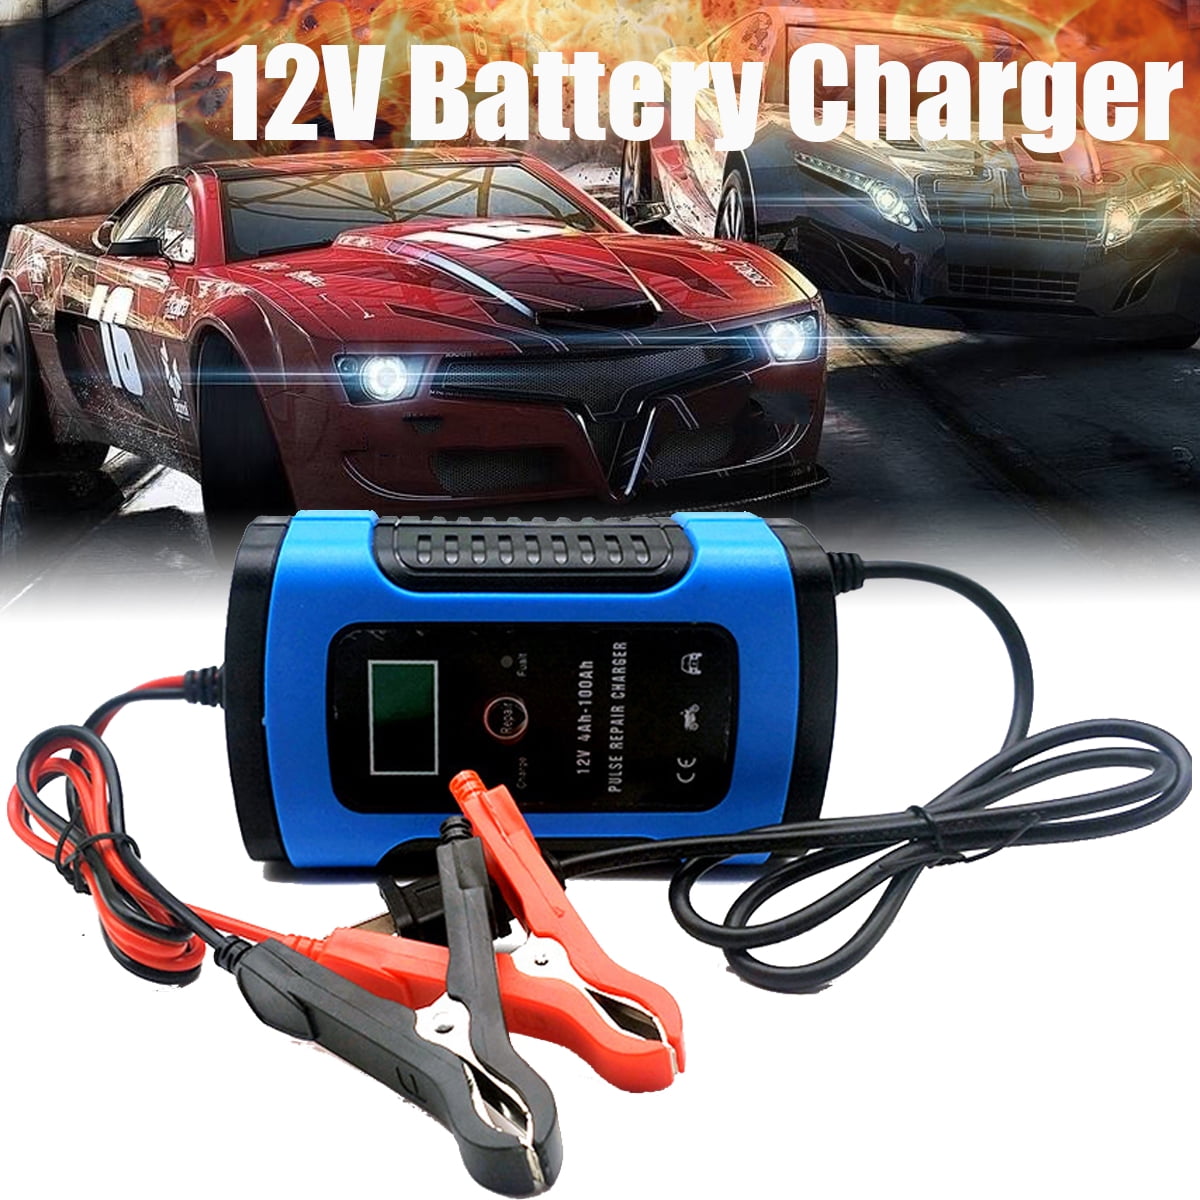 Brand New 4AMP 12V Portable Automatic Battery Charger For Motor Bike and Car